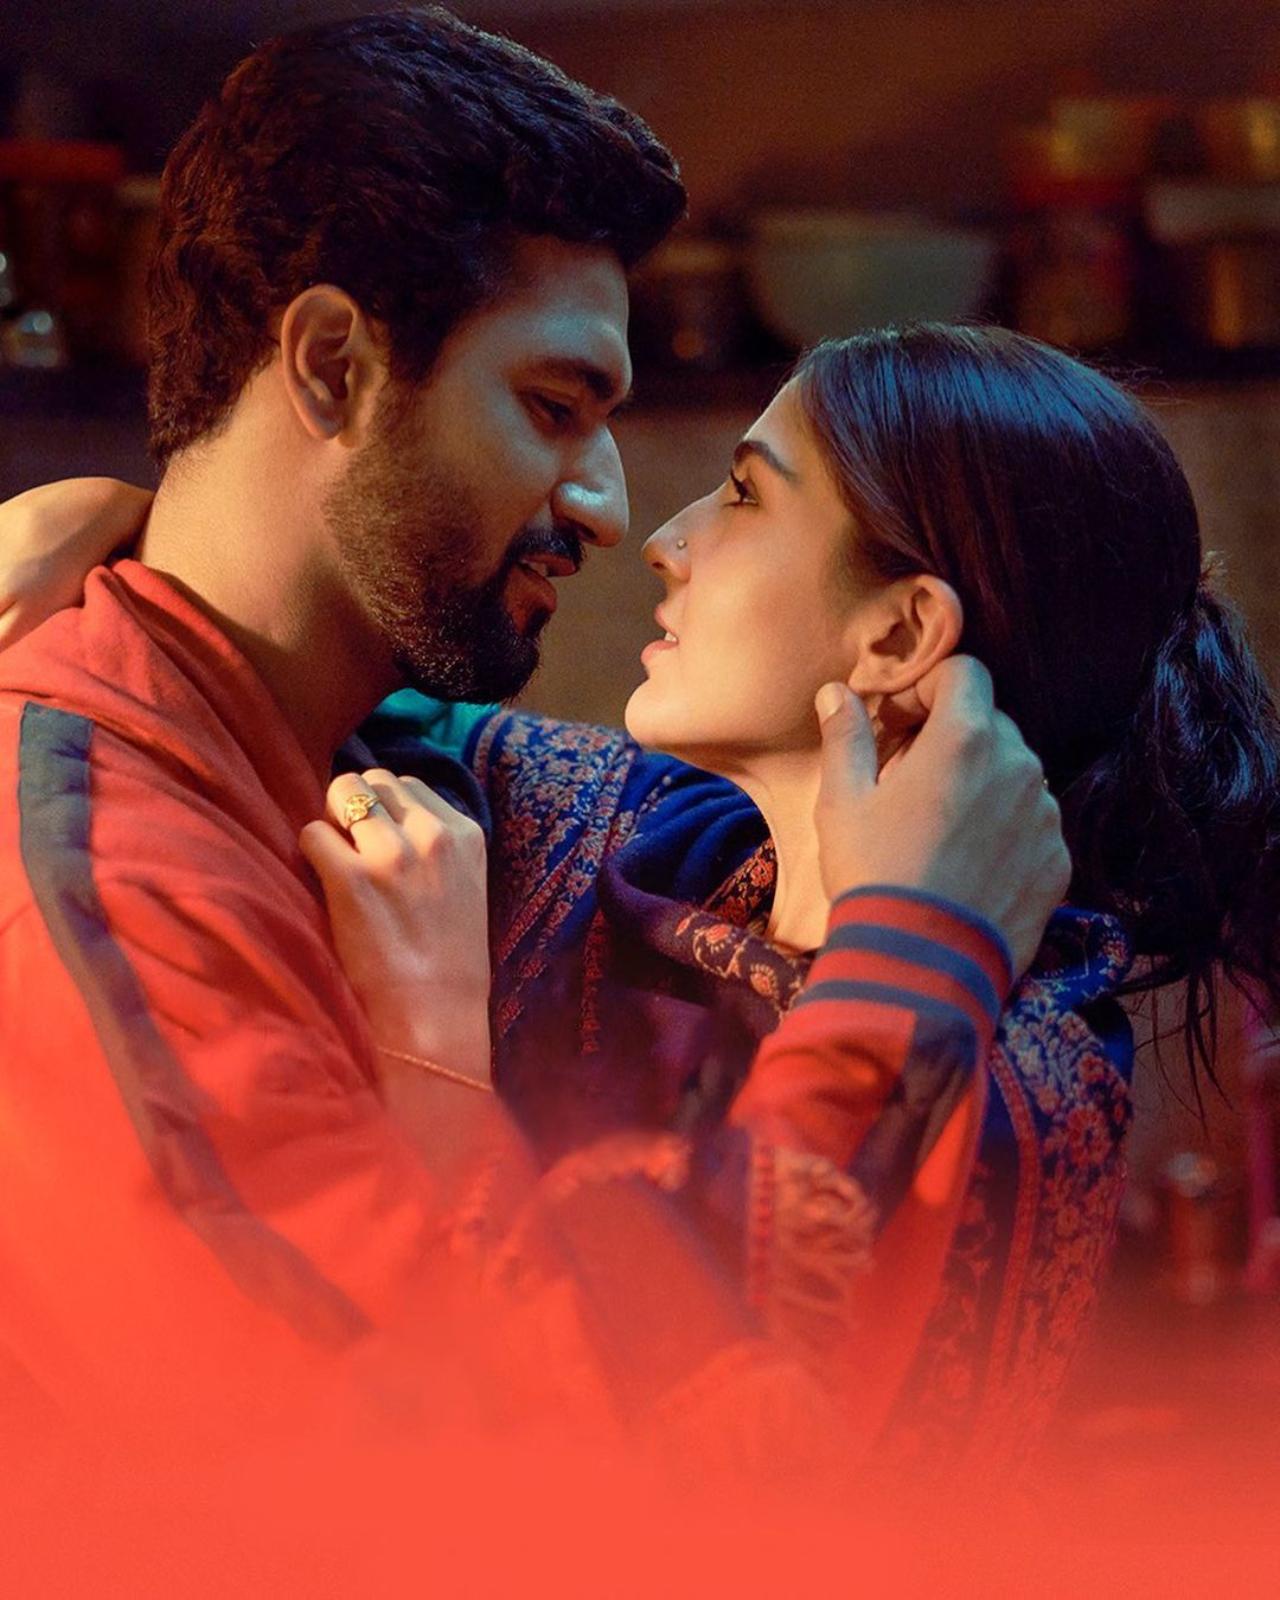 Vicky Kaushal - Sara Ali Khan
The 'Govinda Naam Mera' actor and 'Atrangi Re' actress teased the first look of their first venture together on Instagram. The shooting of this untitled romantic comedy helmed by 'Mimi' filmmaker Laxman Utekar has already wrapped up. No further details have been announced yet